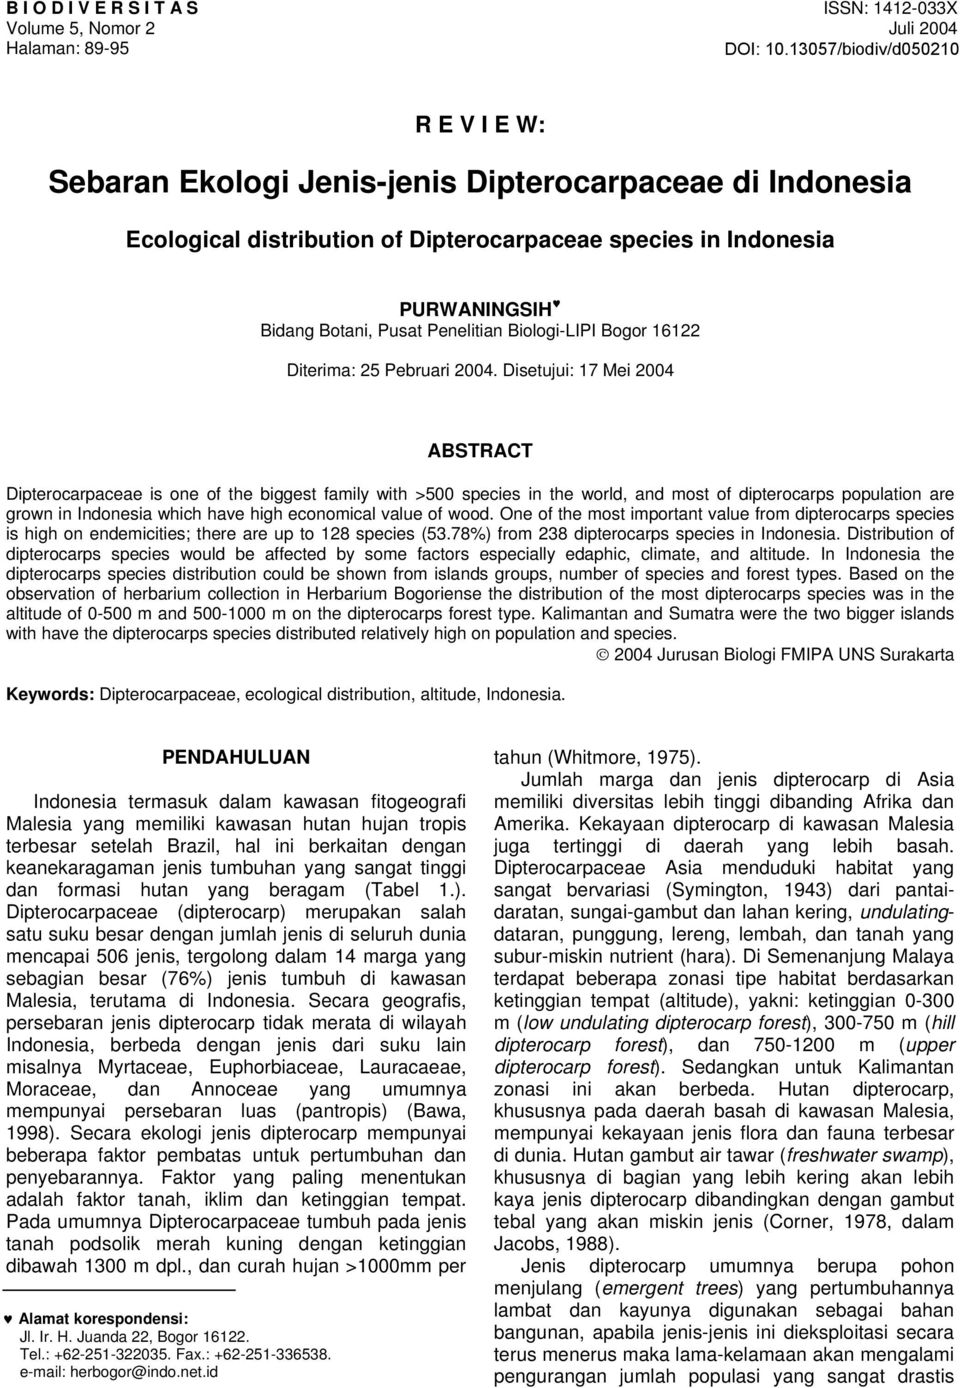 Disetujui: 17 Mei 2004 ABSTRACT Dipterocarpaceae is one of the biggest family with >500 species in the world, and most of dipterocarps population are grown in Indonesia which have high economical